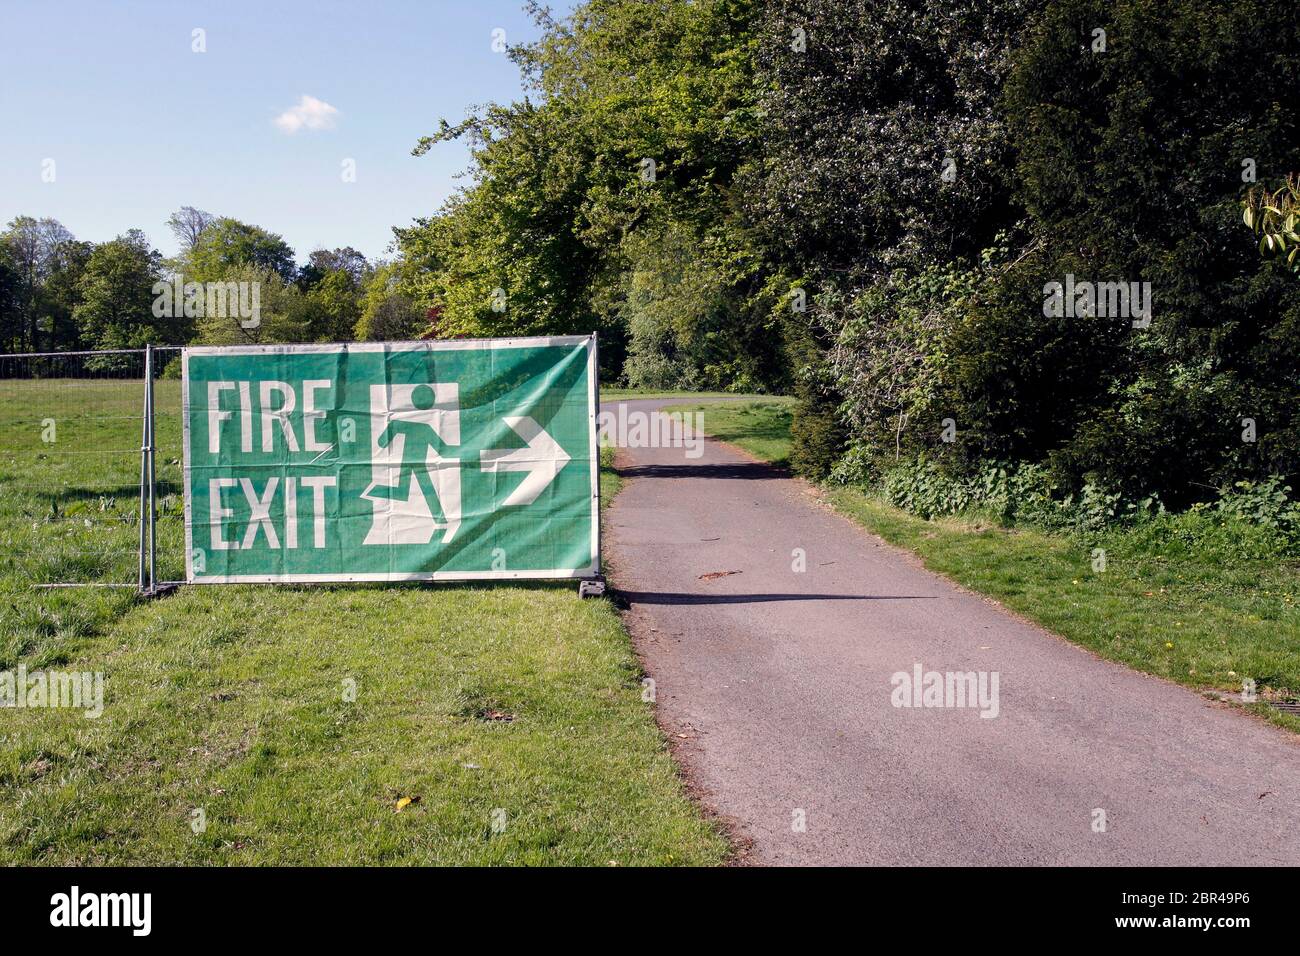 Outdoor Fire Exit sign in una area forestale Foto Stock